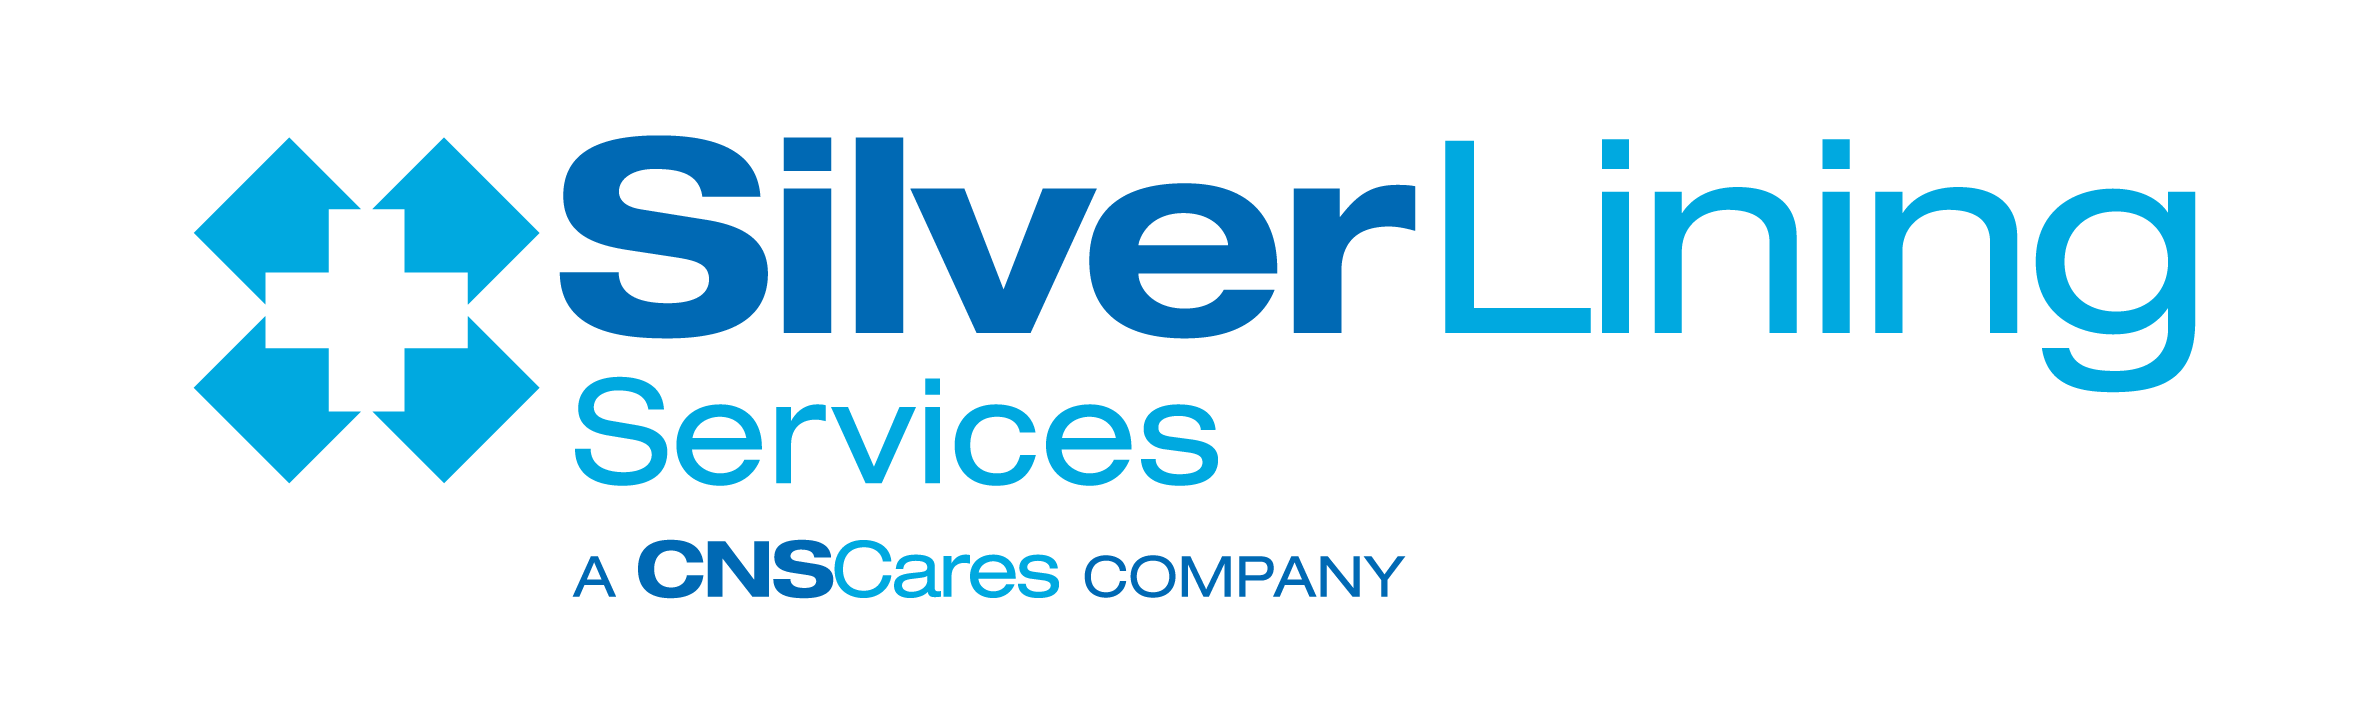 Silver Lining Homecare